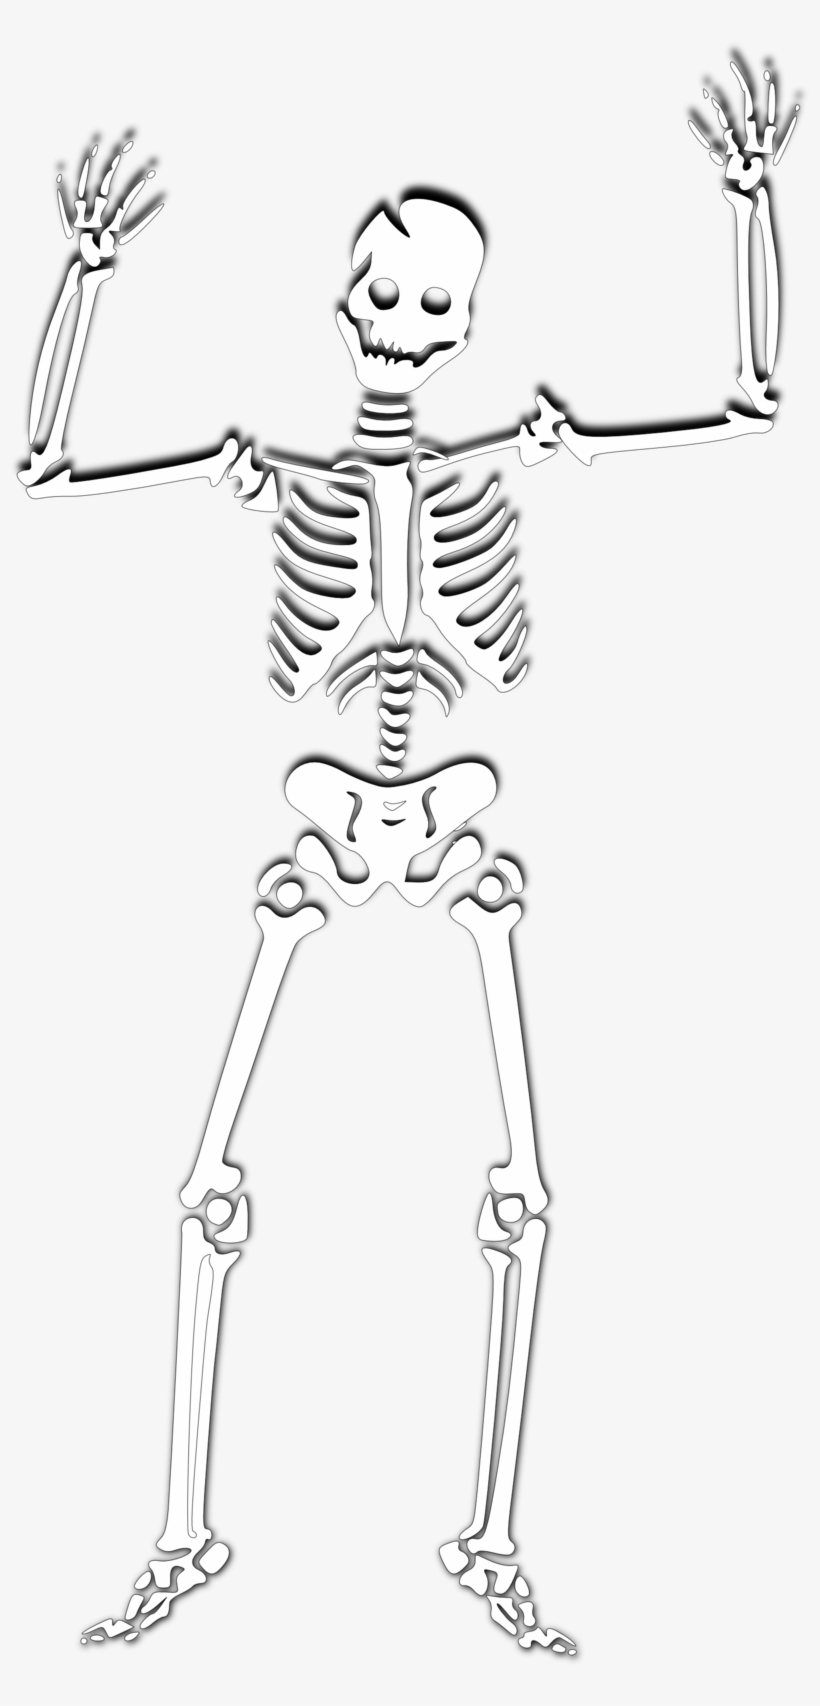 Halloween Skeleton Png Photos - Spooky Scary Skeleton Png, transparent png #4553304